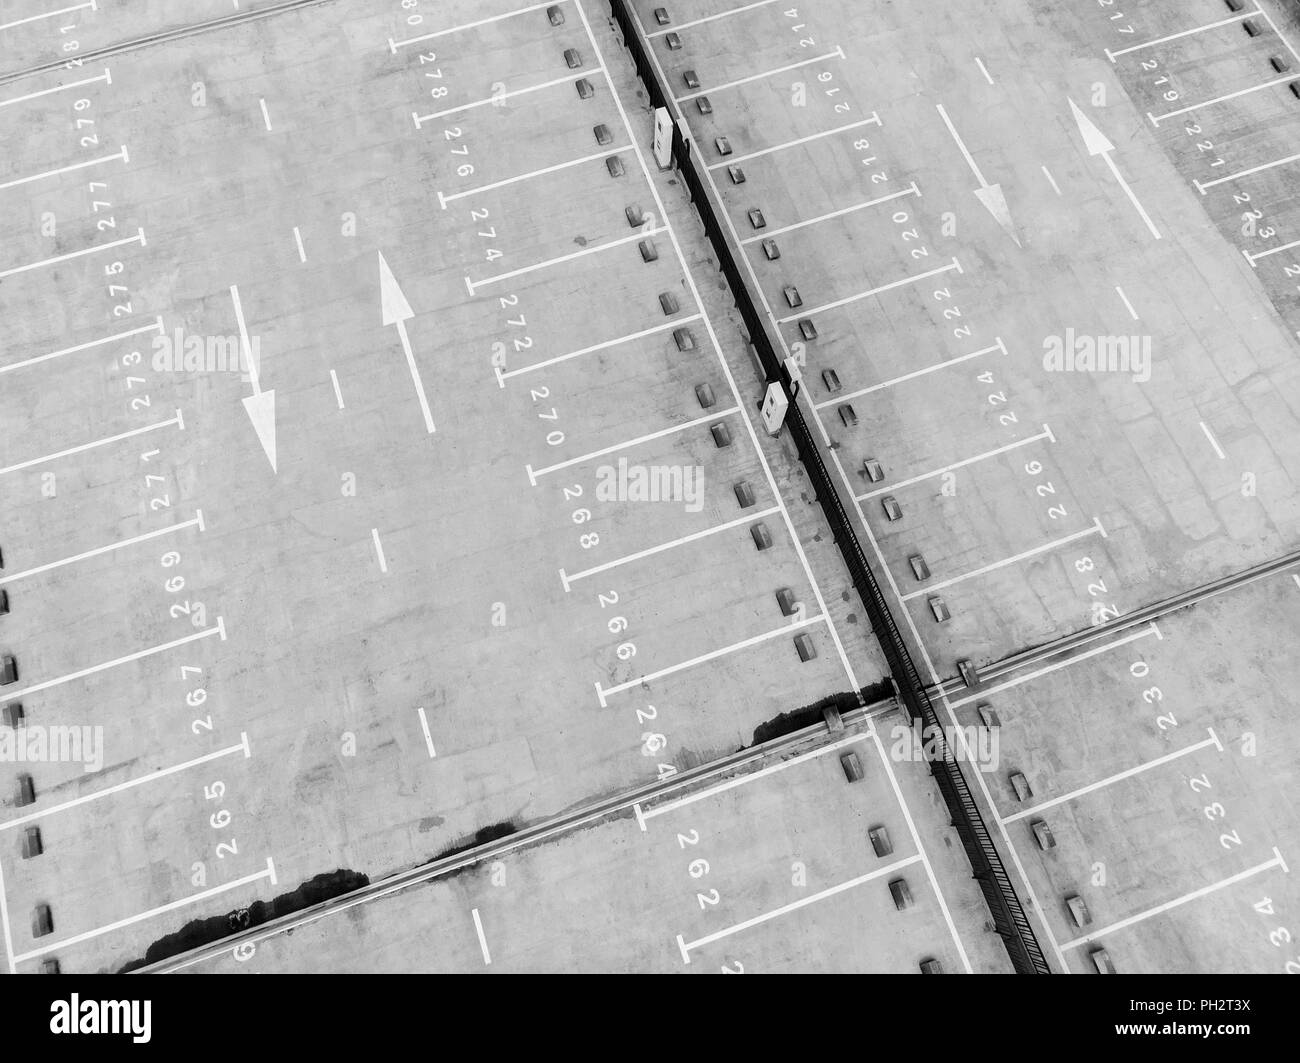 white marking lines and numbers on surface of empty parking lot, view from above Stock Photo